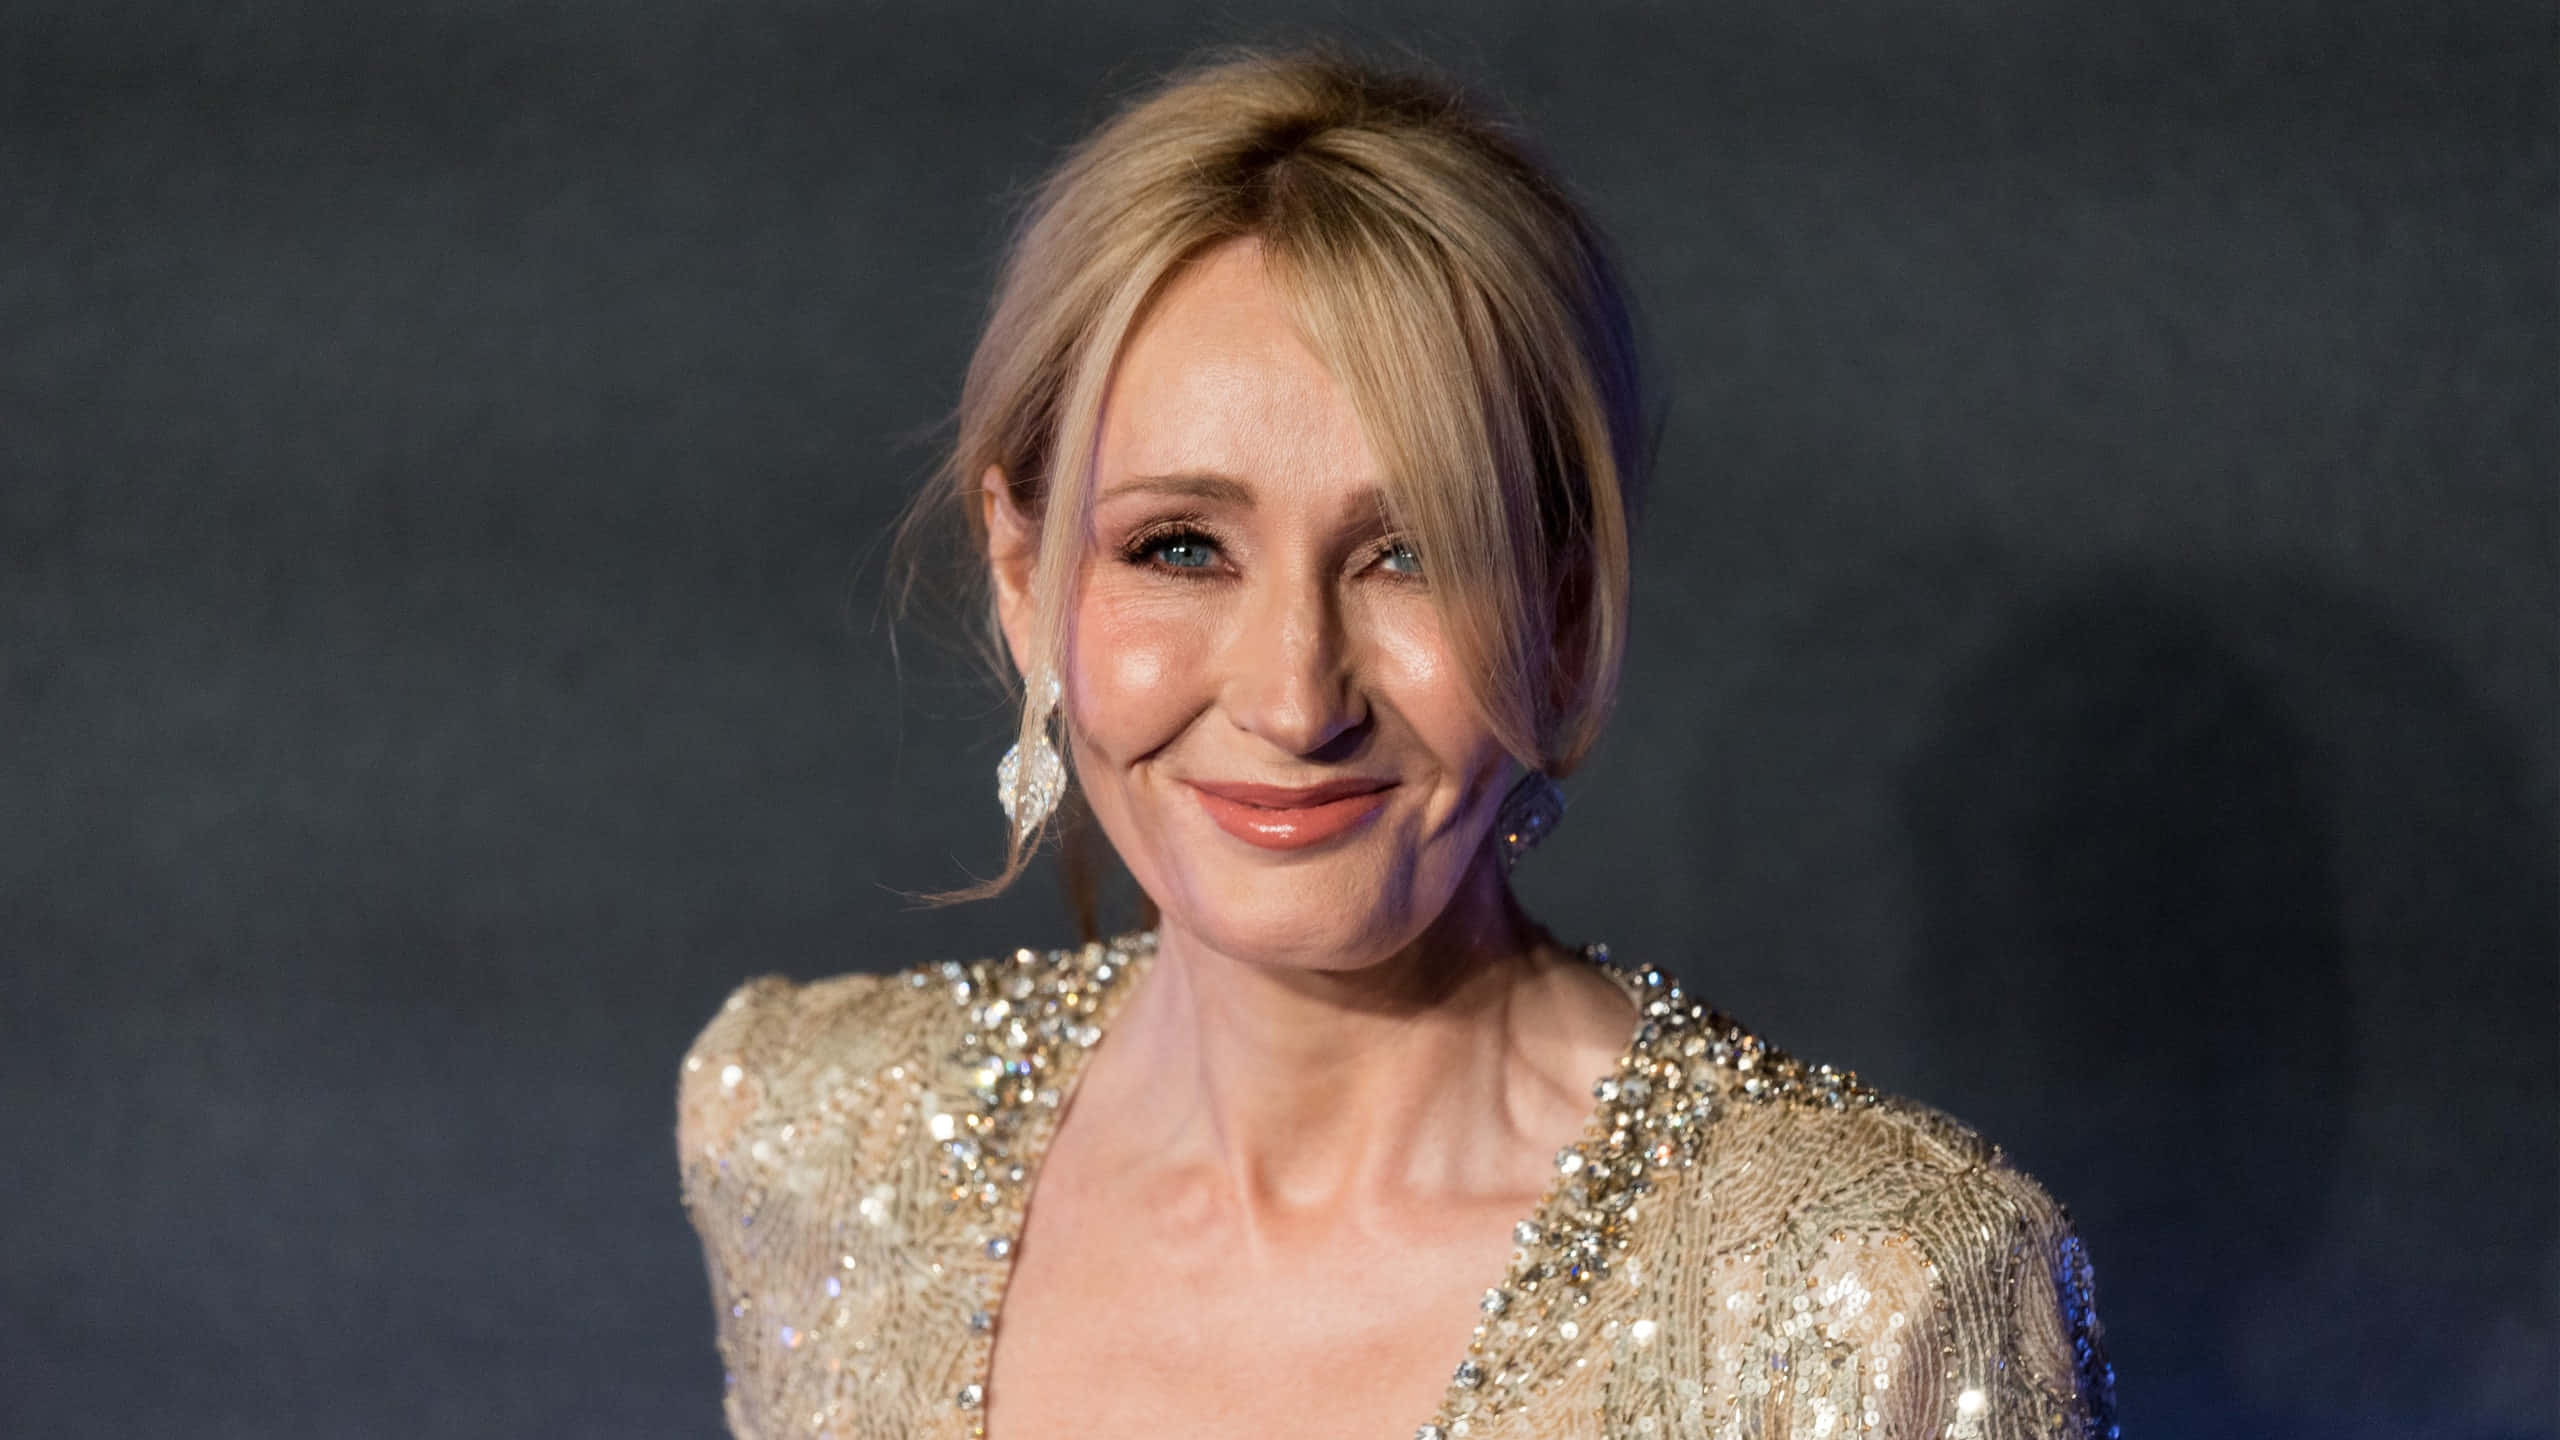 J.K. Rowling Smiling at a Book Event Wallpaper